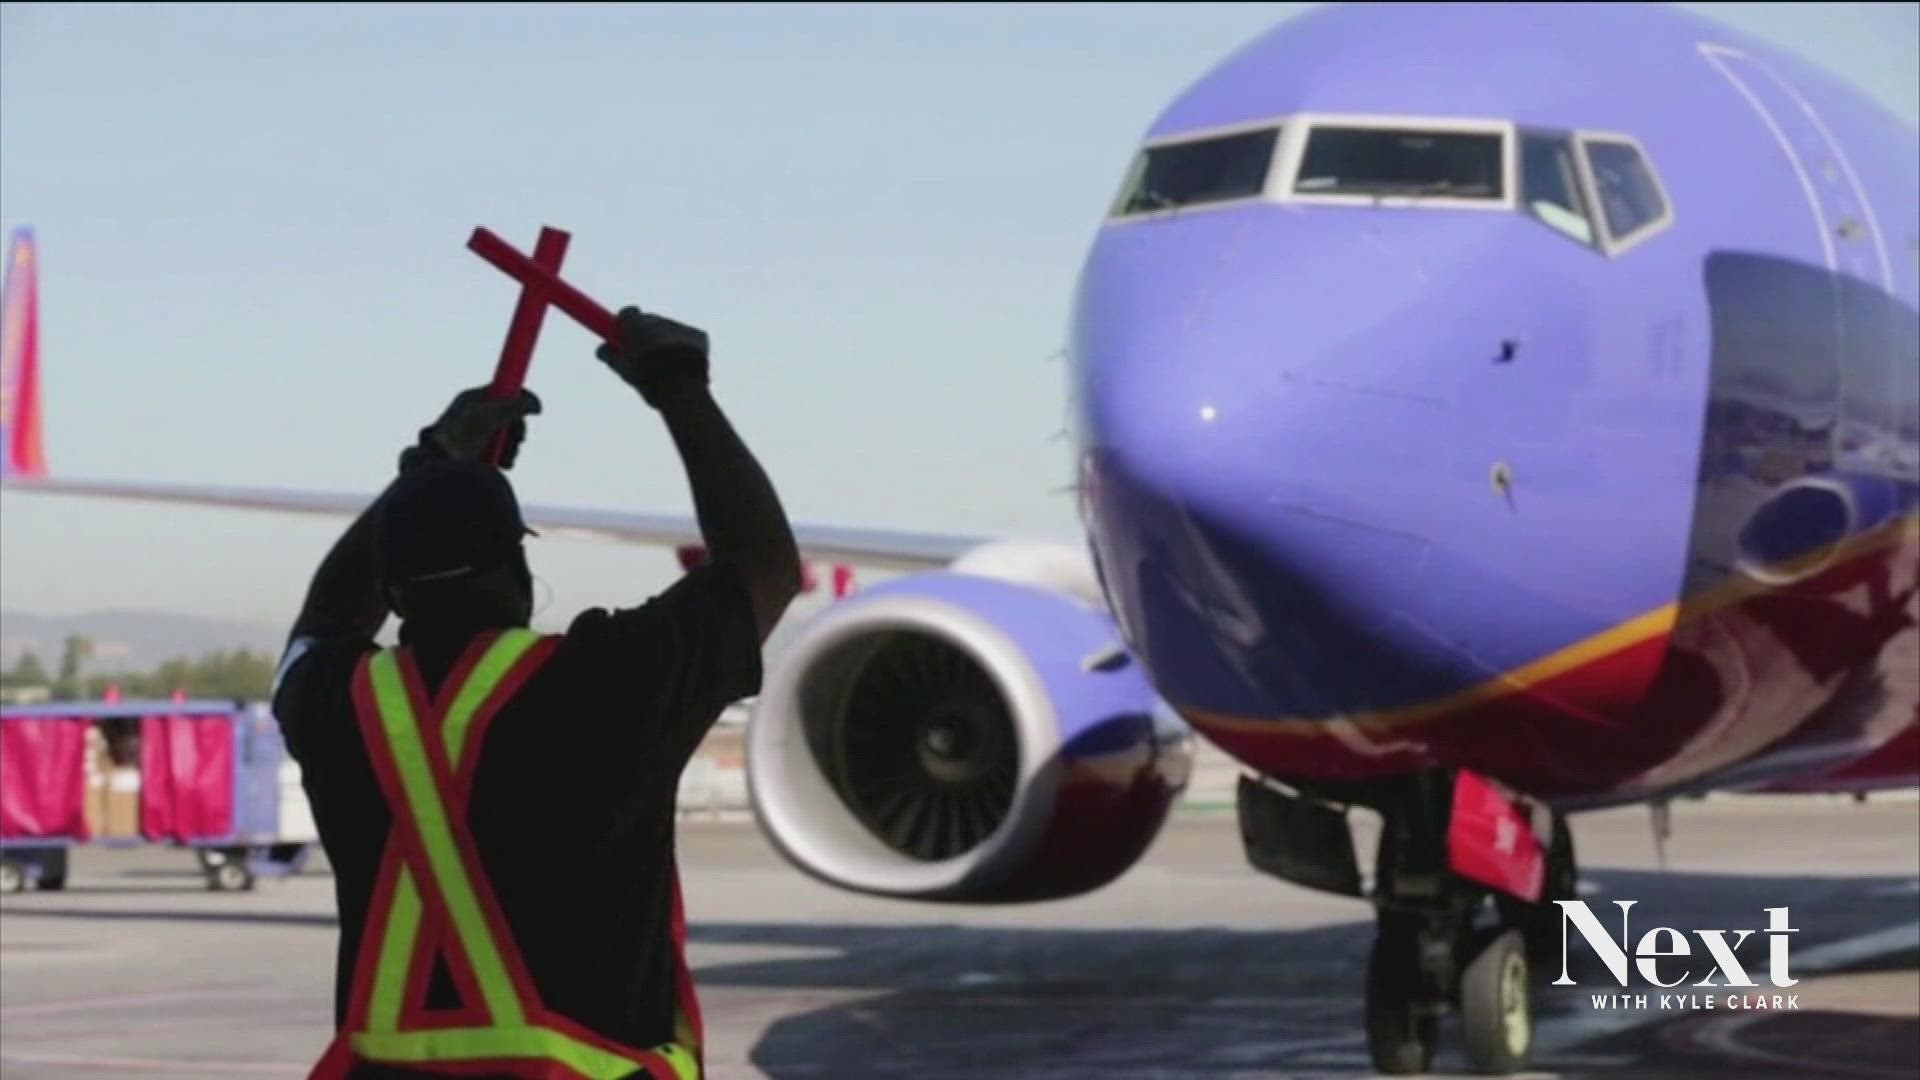 In court documents, Southwest said the Colorado Healthy Families and Workplaces Act “imposes a pervasive and comprehensive paid sick leave scheme on employers.”